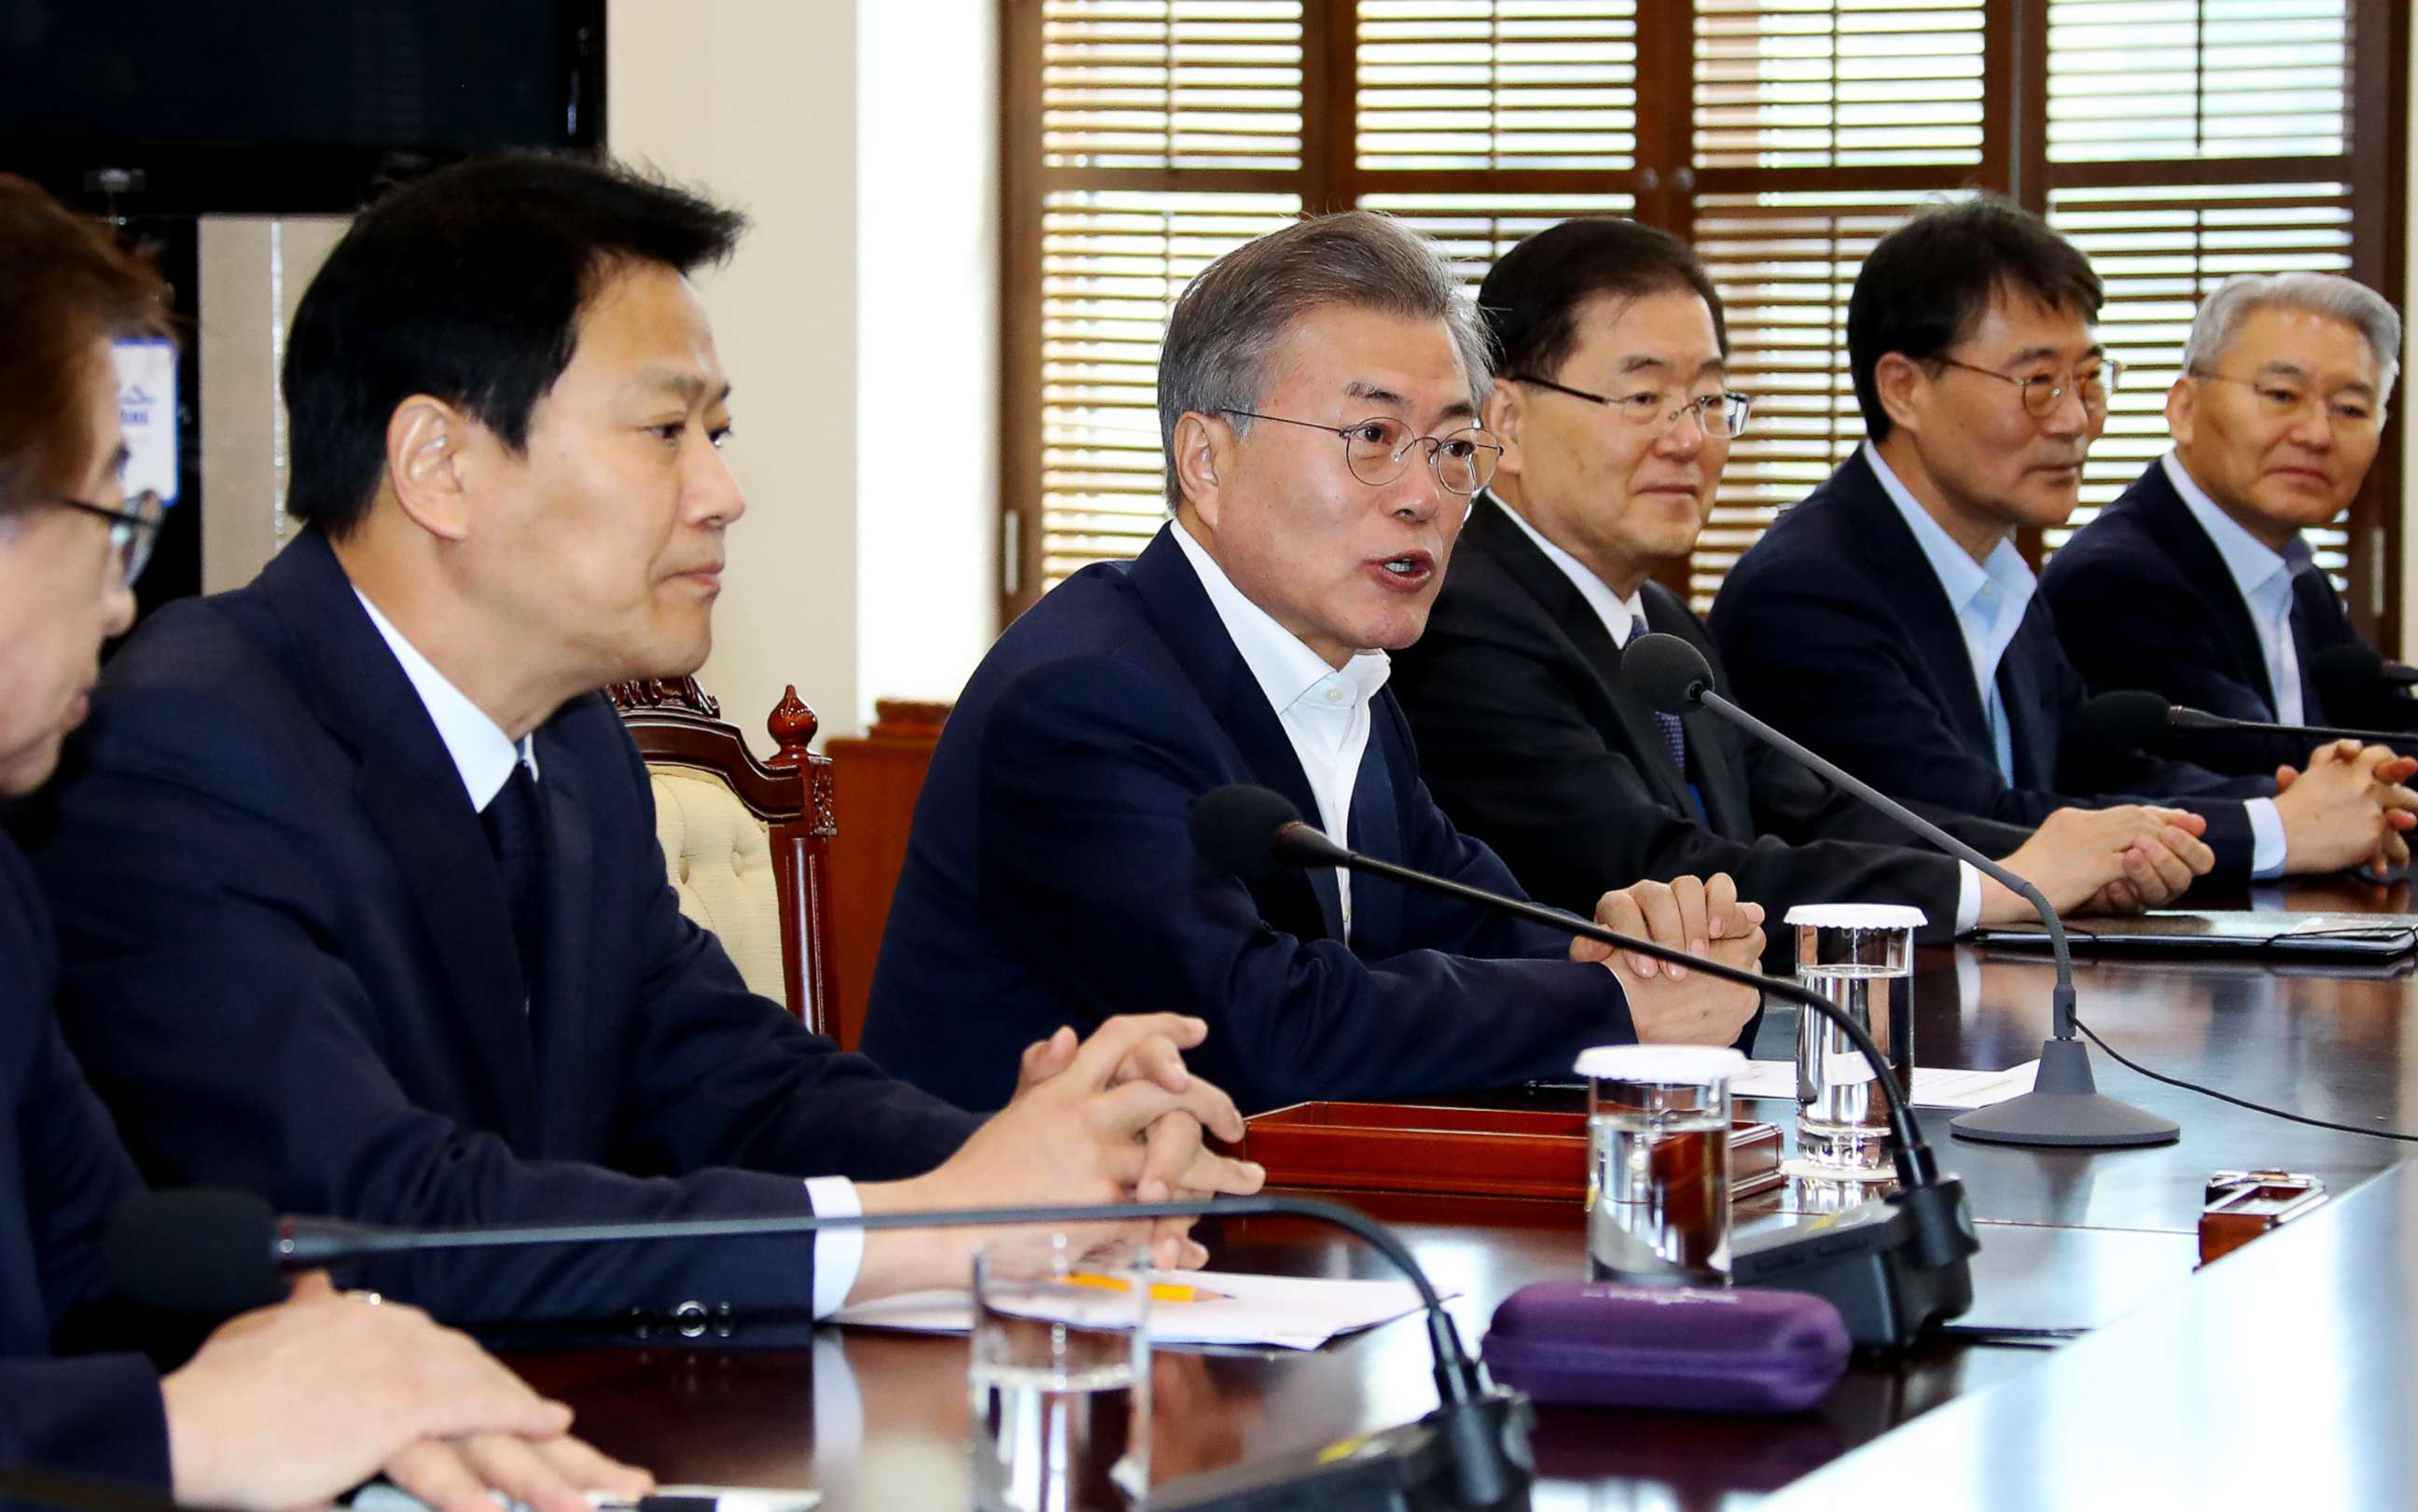 PHOTO: South Korean President Moon Jae-in, fourth from right, speaks during a meeting to prepare a planned summit between South and North Korea at the presidential Blue House in Seoul, South Korea, March 21, 2018.